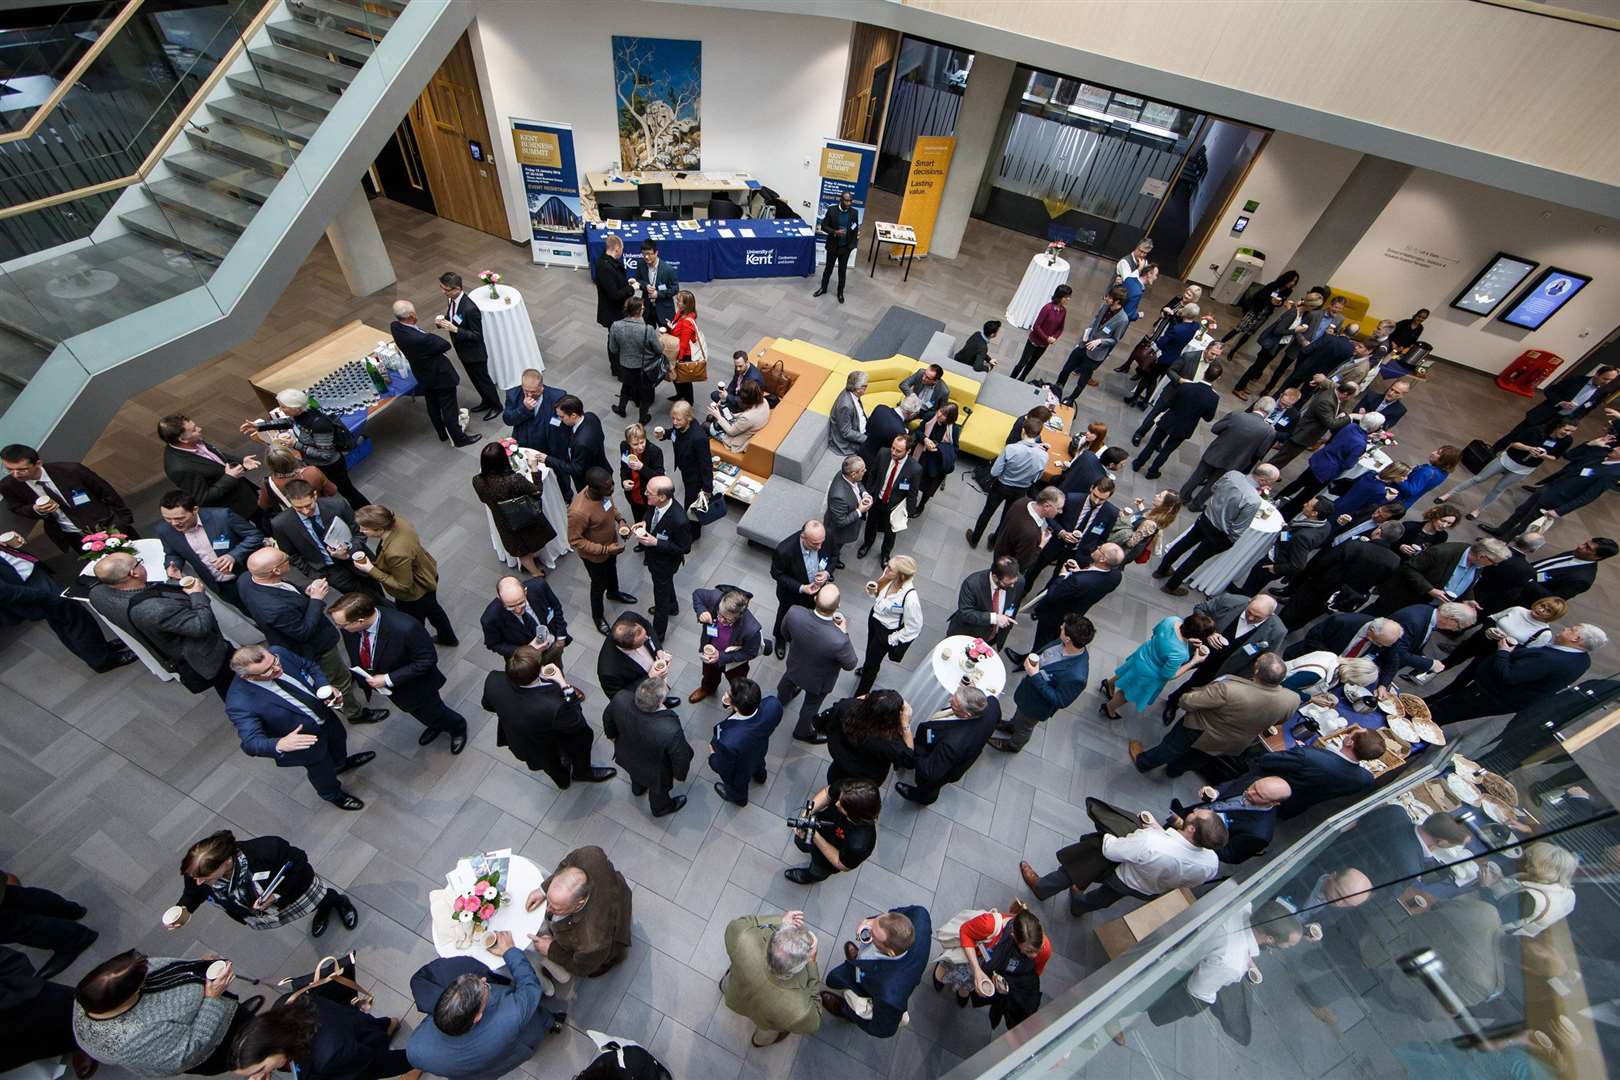 Hundreds will attend the event at the University of Kent's business school in Canterbury